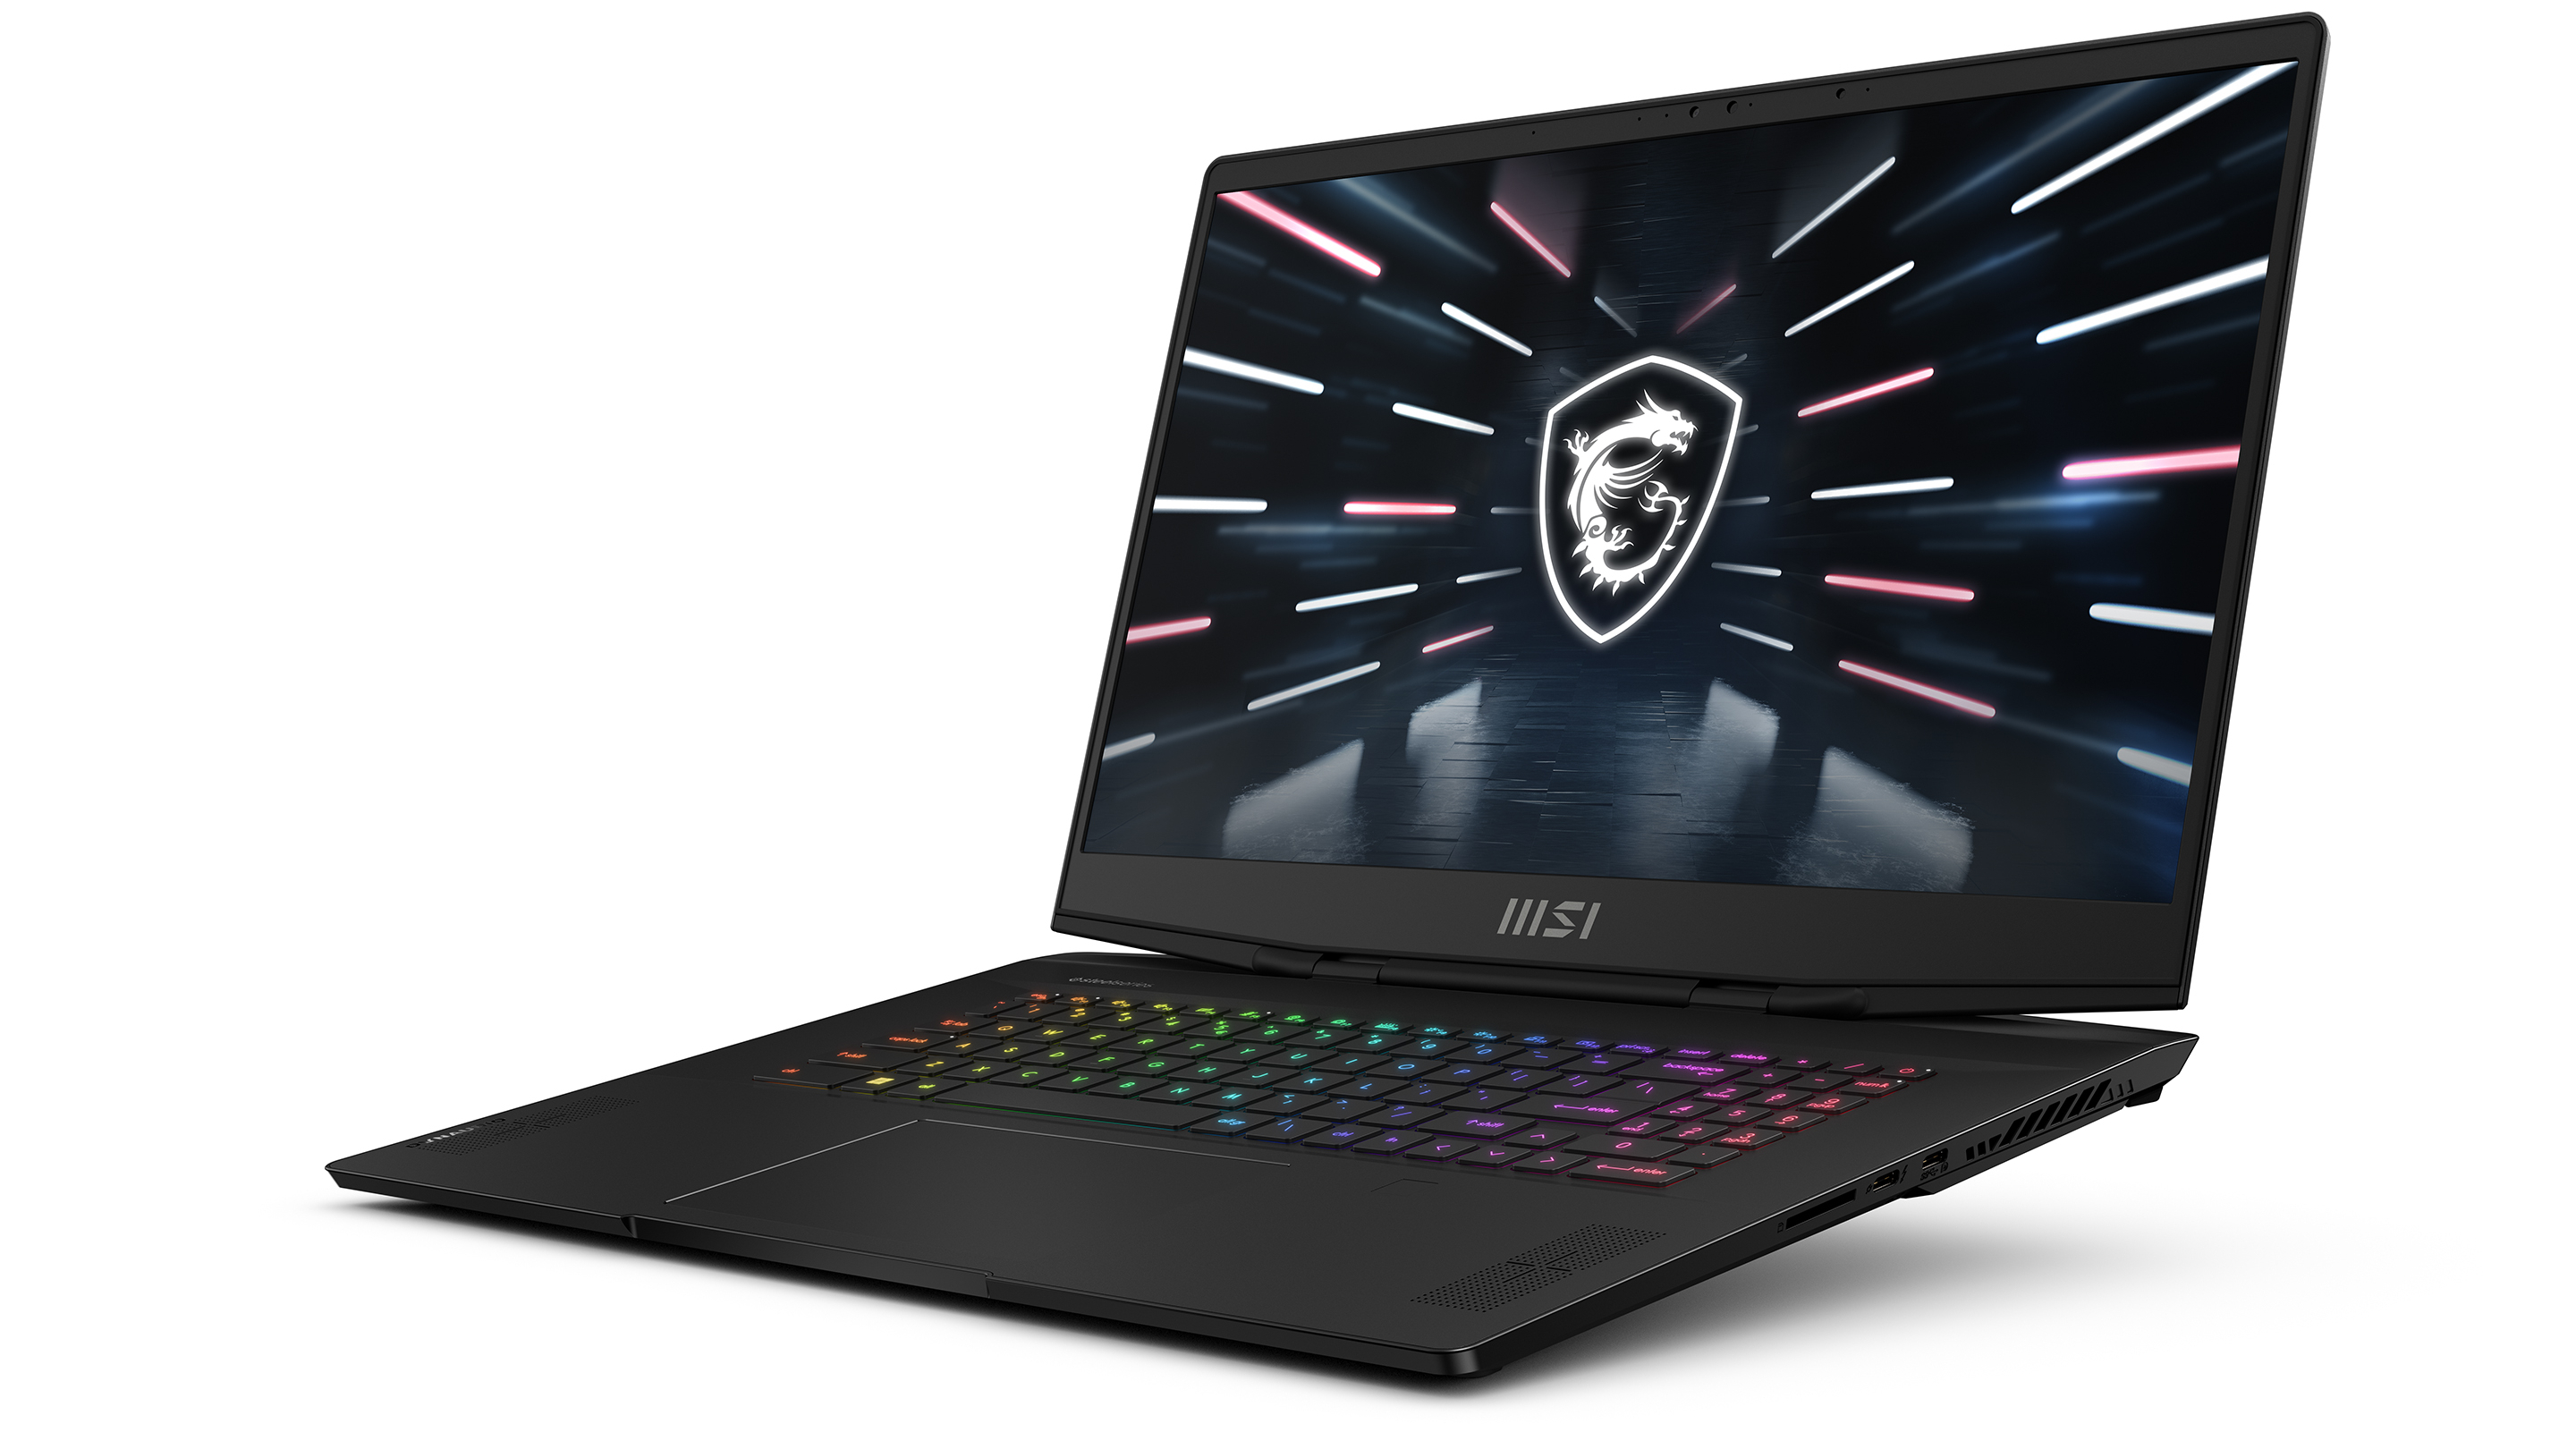 MSI Stealth GS77 gaming laptop